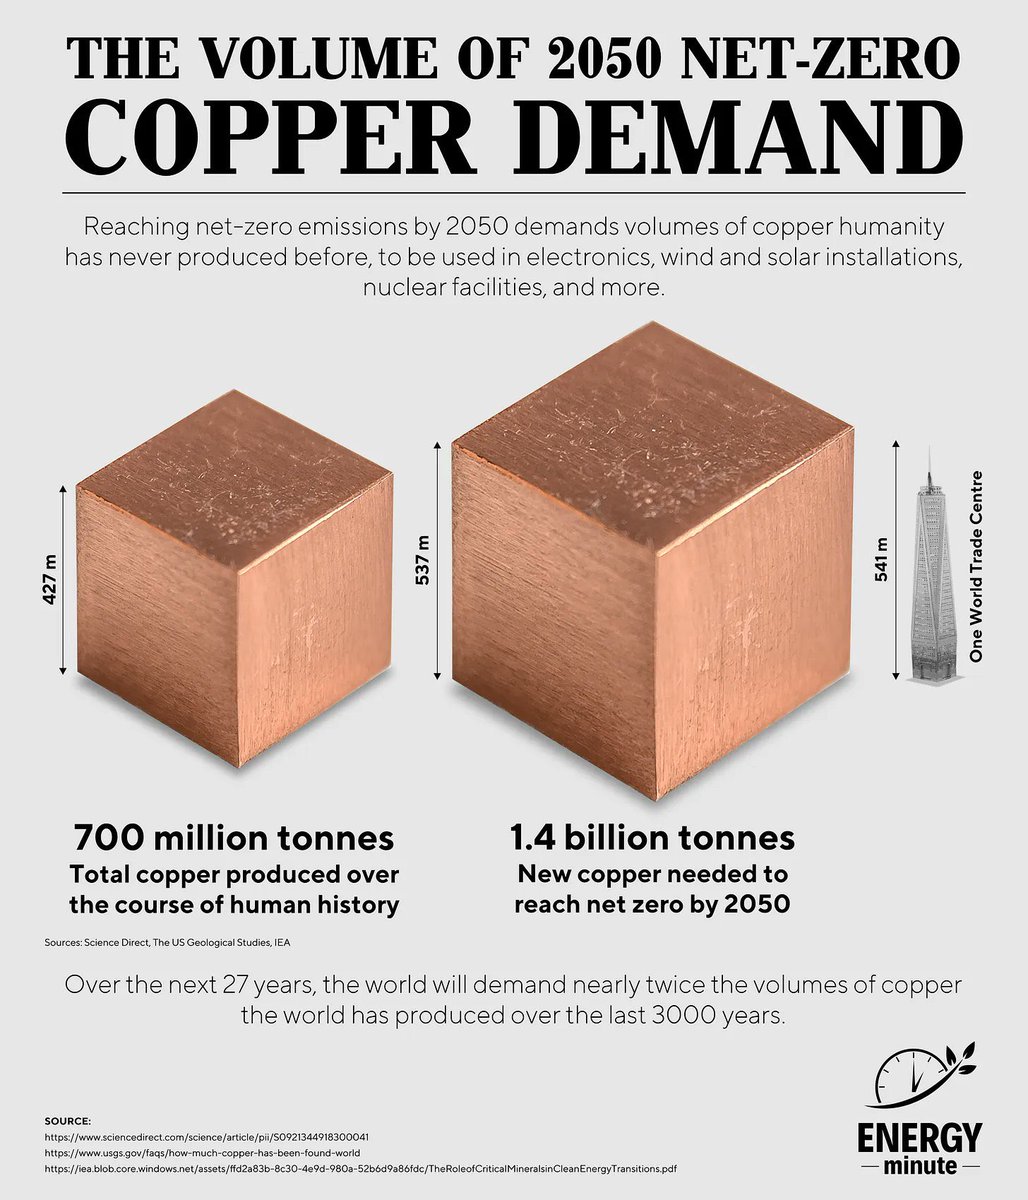 To reach net-zero emissions for electronics, #windpower and #solar installations, nuclear facilities and more by 2050, we will require a lot more #copper than humanity has ever produced in the past.